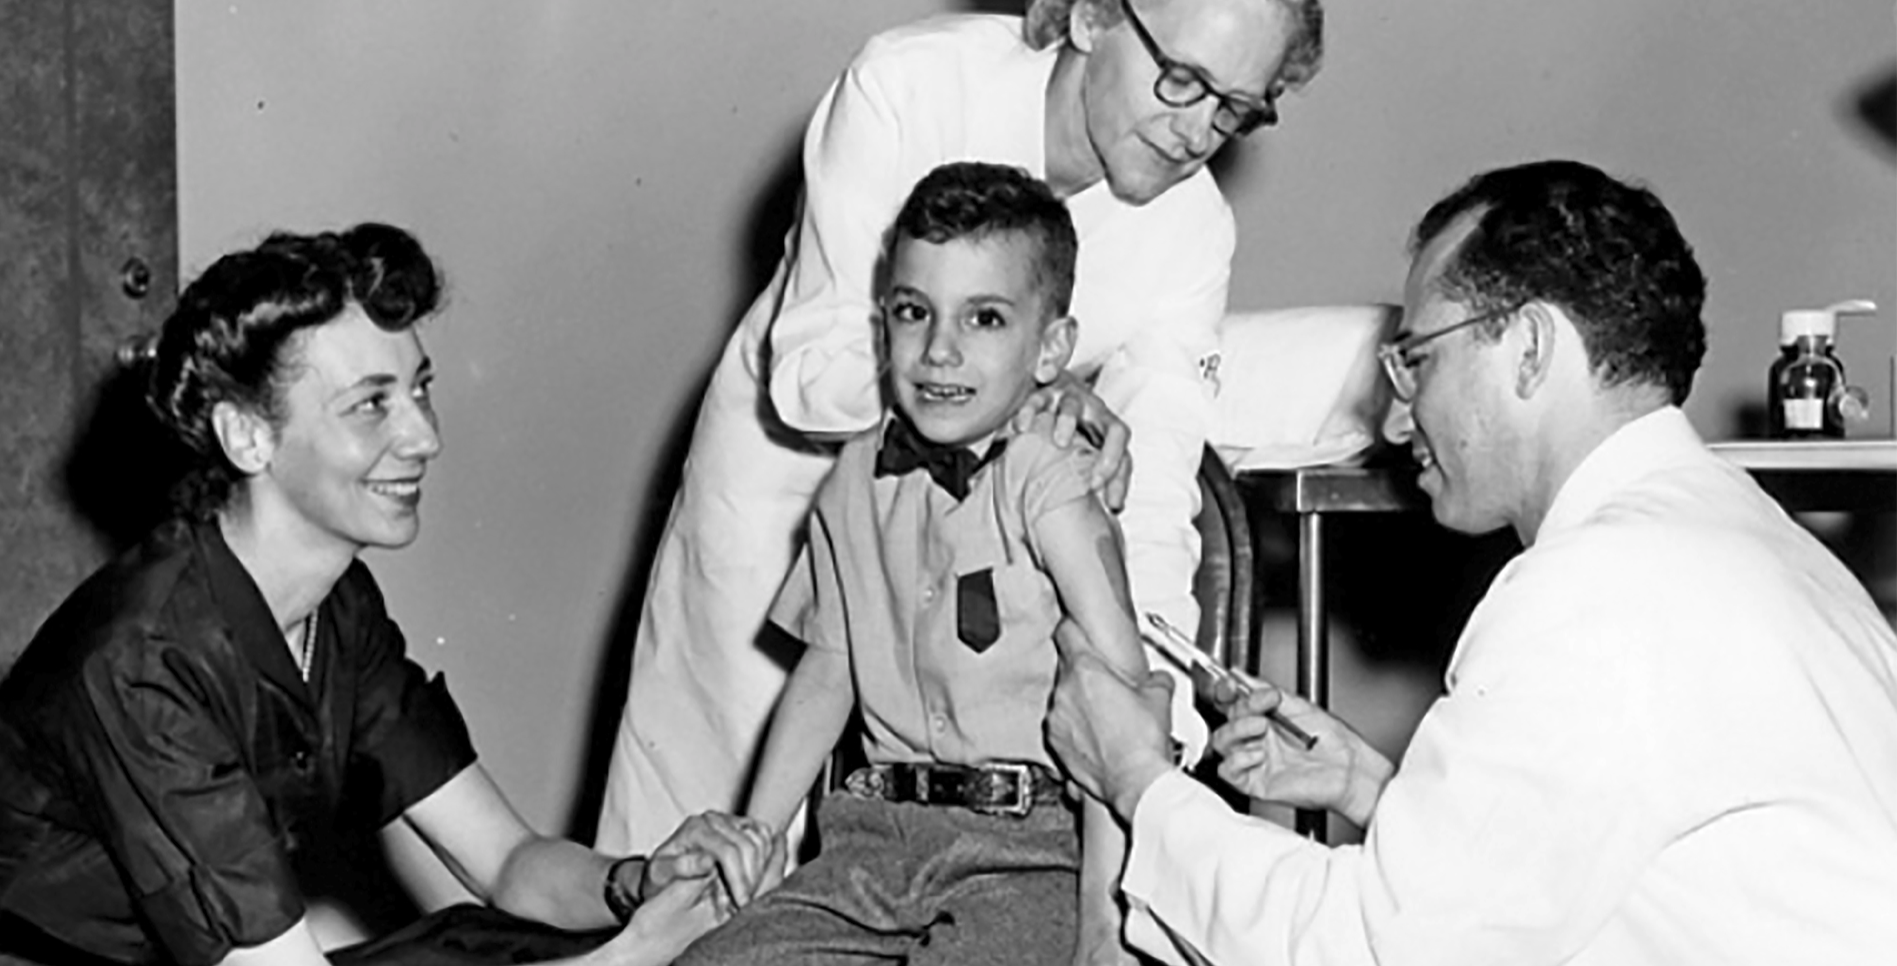 In 1955, Dr. Jonas Salk is administering the polio vaccine he invented into his son’s arm, ending a very dark time in the world. Courtesy of Darrell Salk.